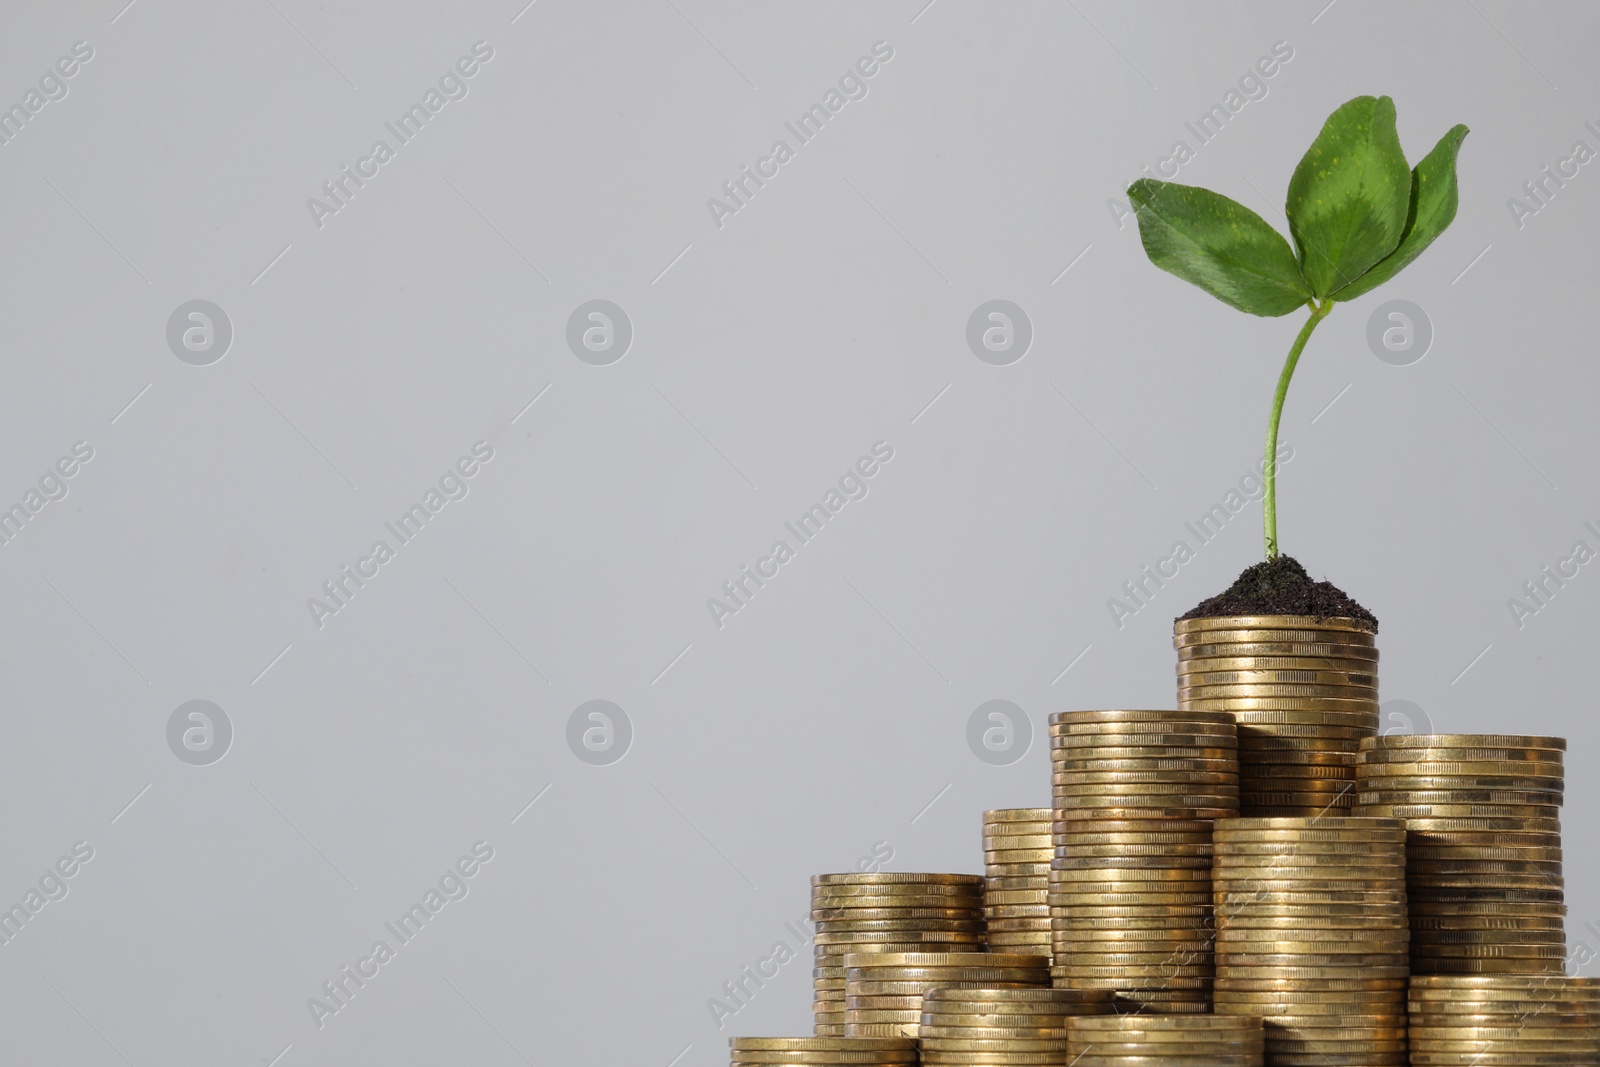 Photo of Stacks of coins with green sprout against light grey background, space for text. Investment concept